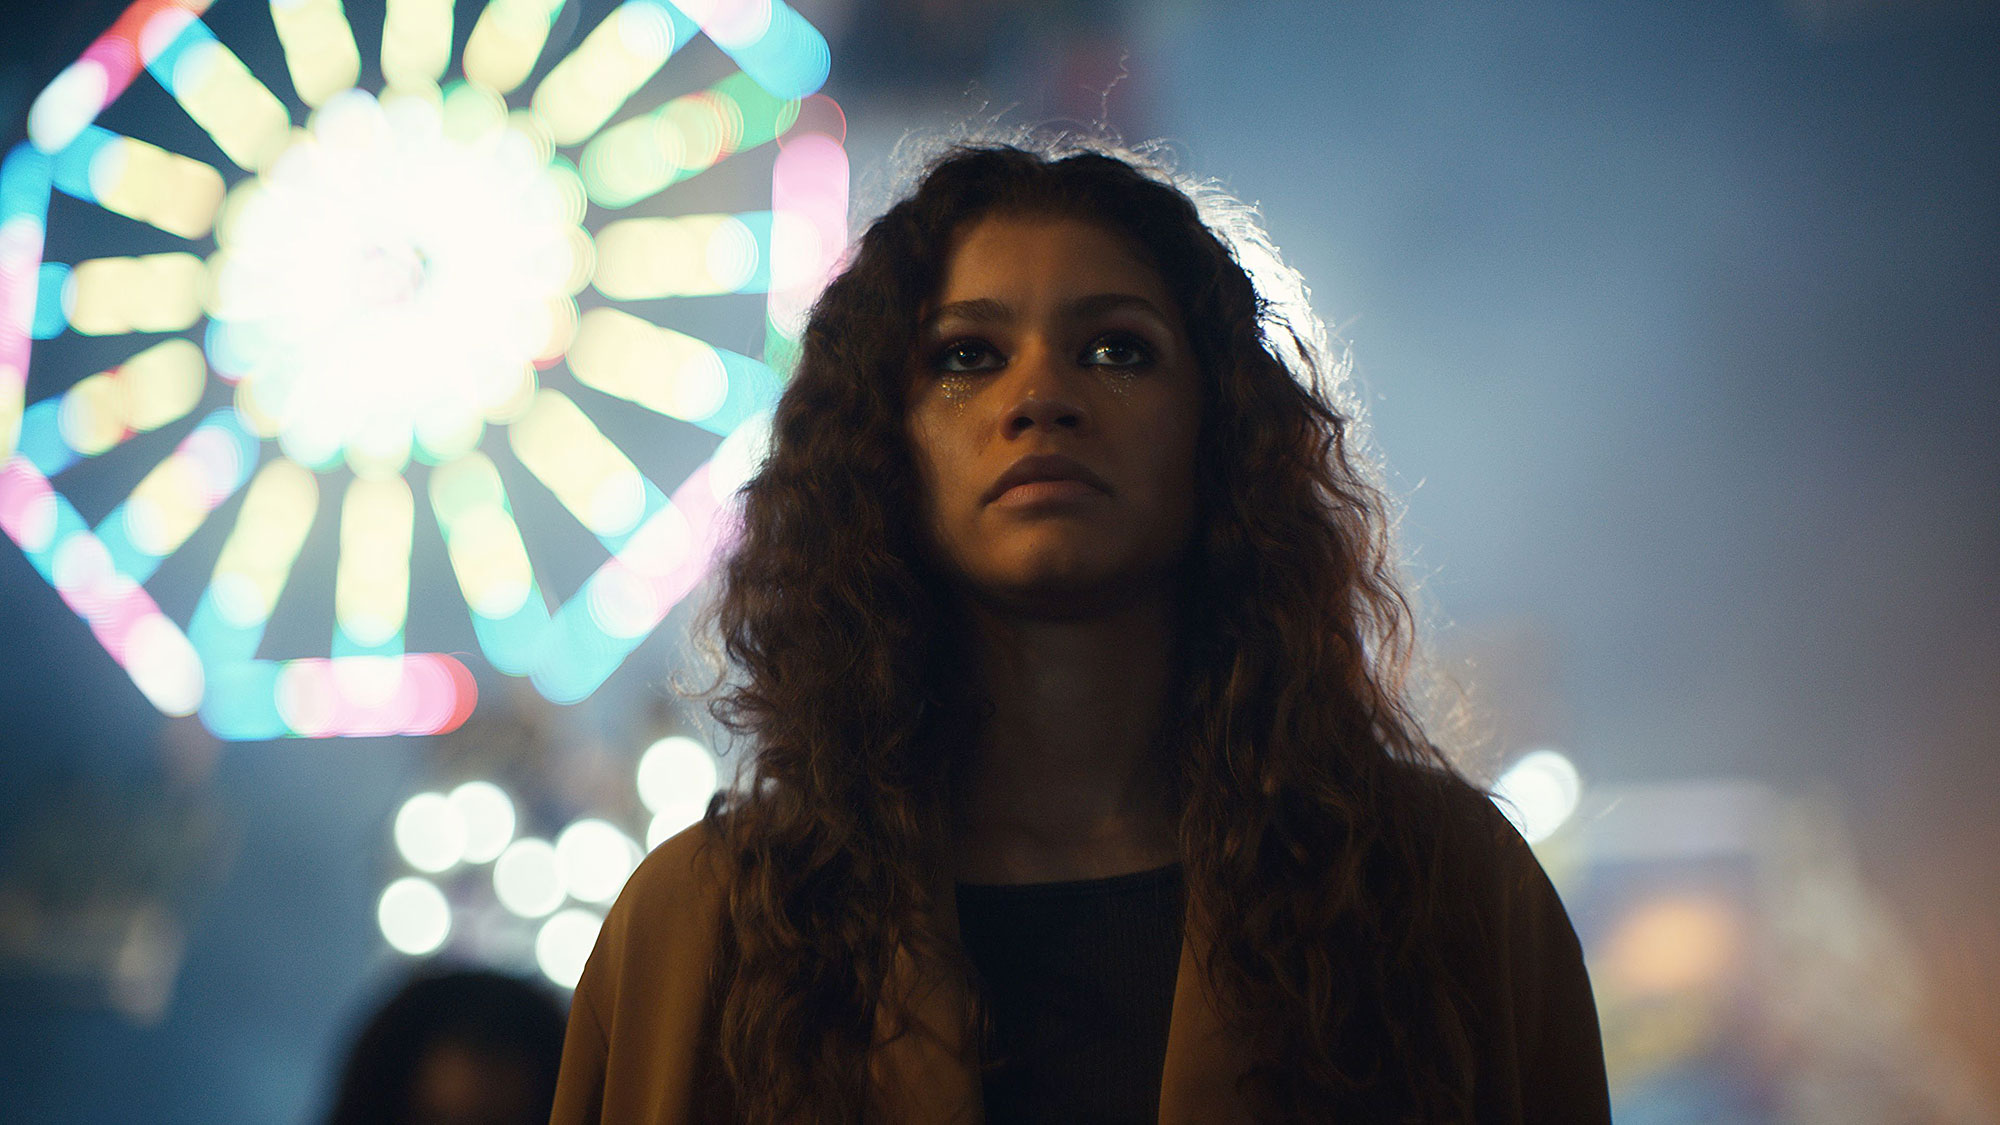 Euphoria Season 3: Major changes to storyline teased, premiere may